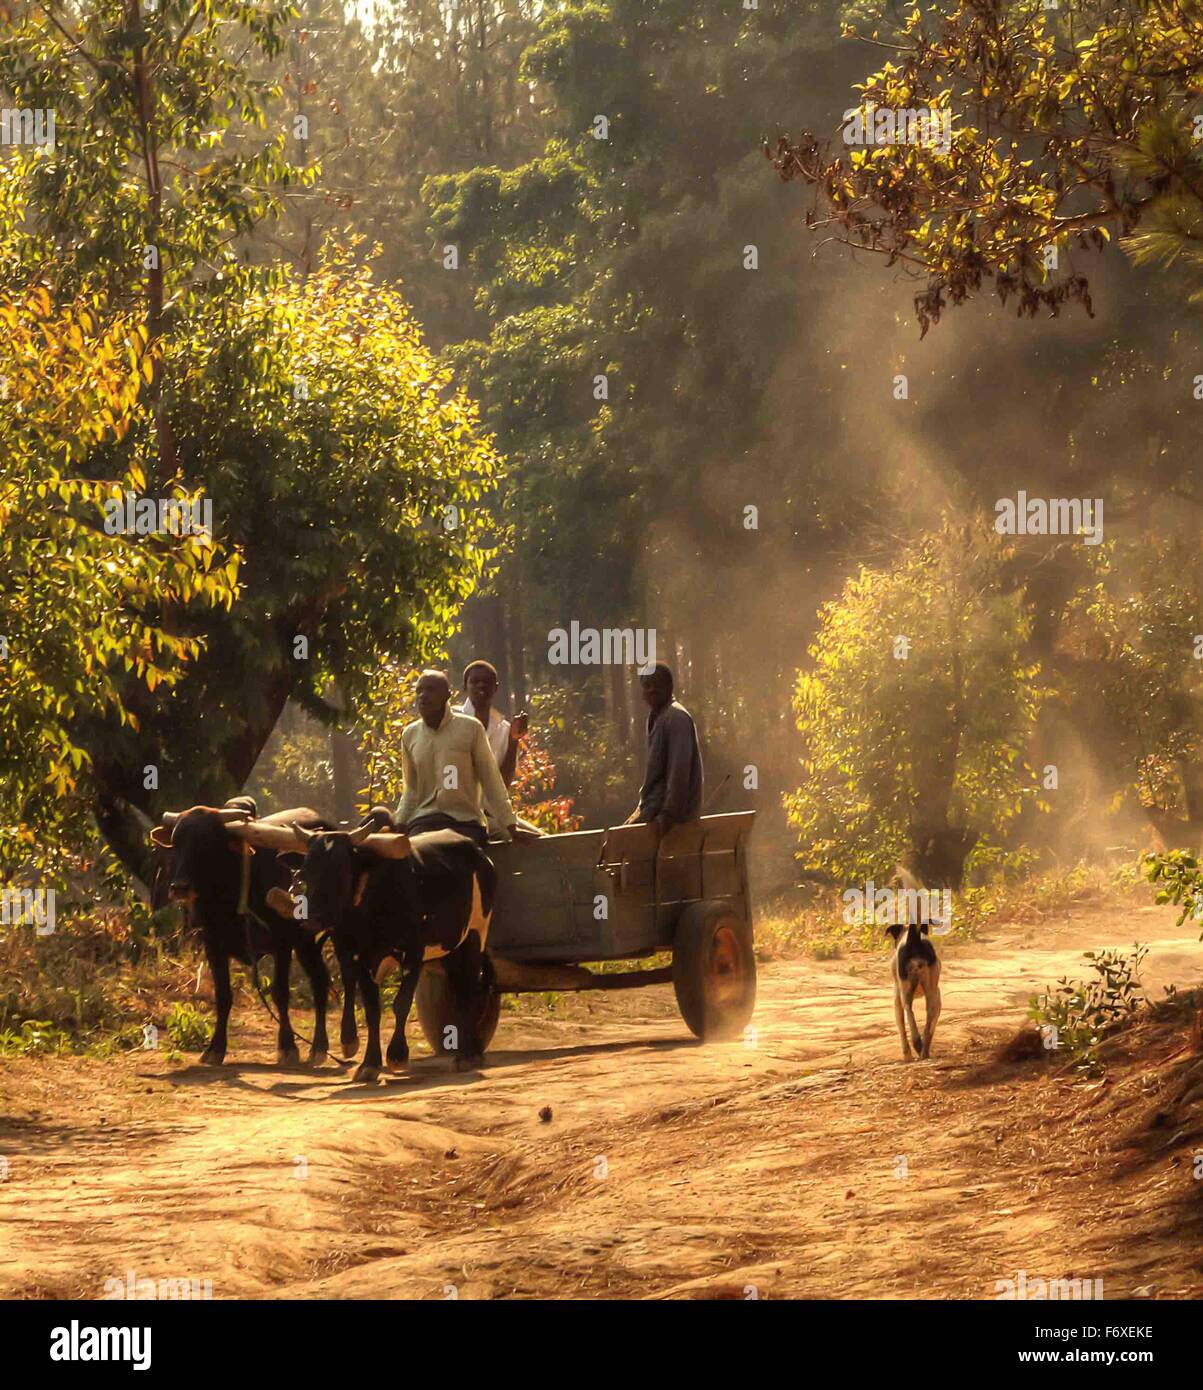 Three men sit in ox cart preparing to carry firewood from Chongoni Forest  near Dedza, Malawi, Africa Stock Photo